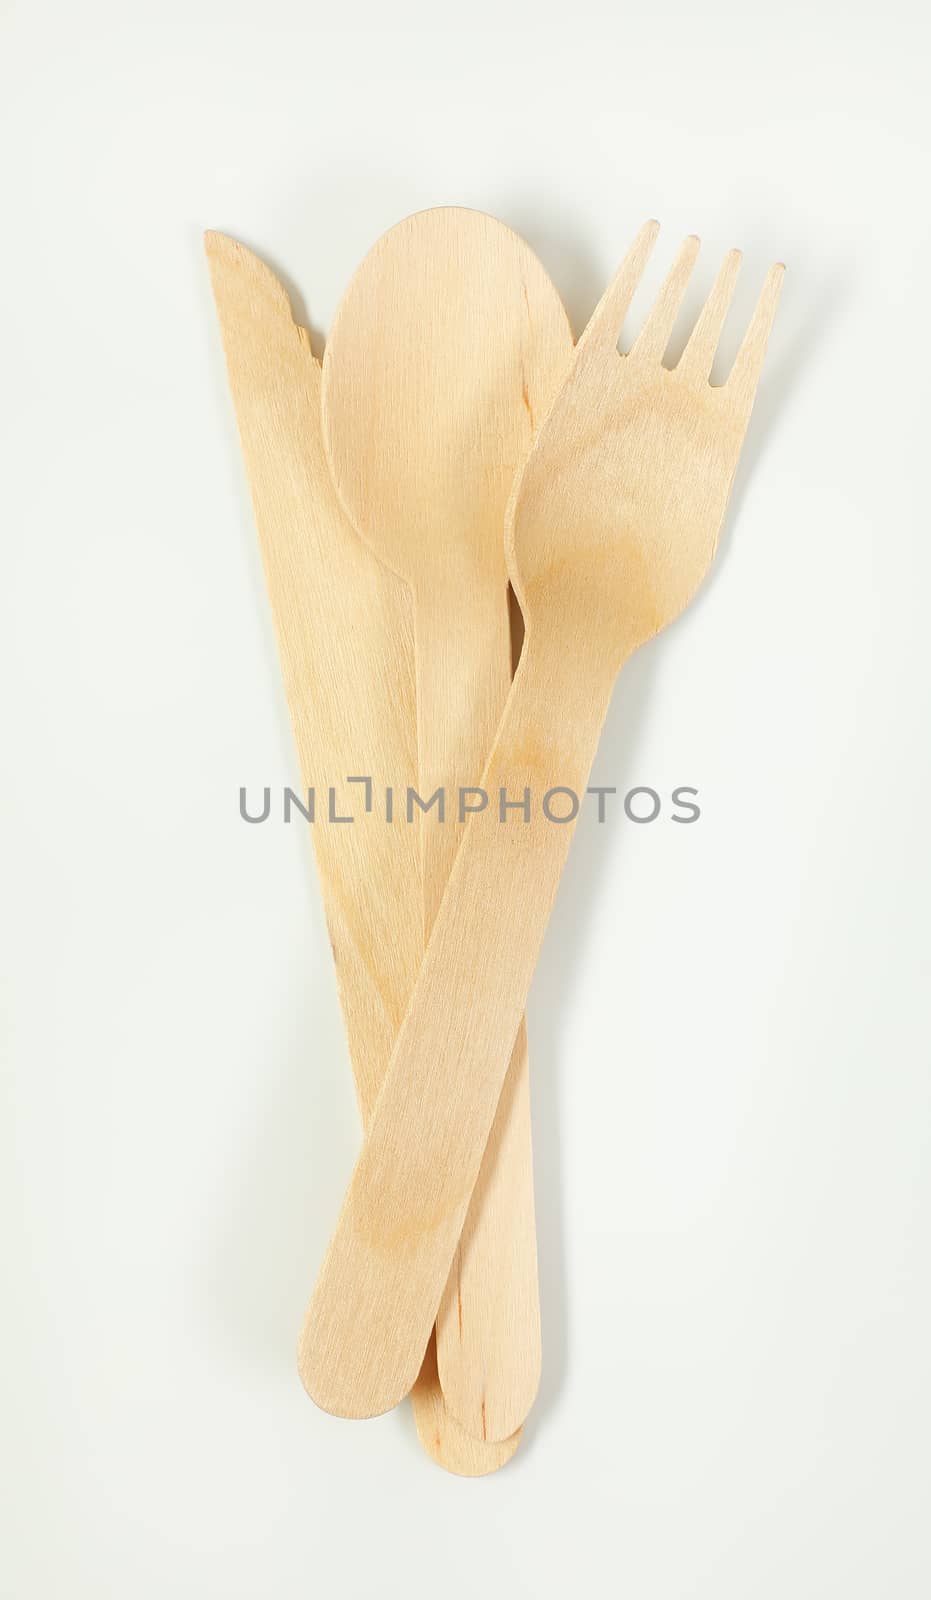 set of wooden cutlery on white background